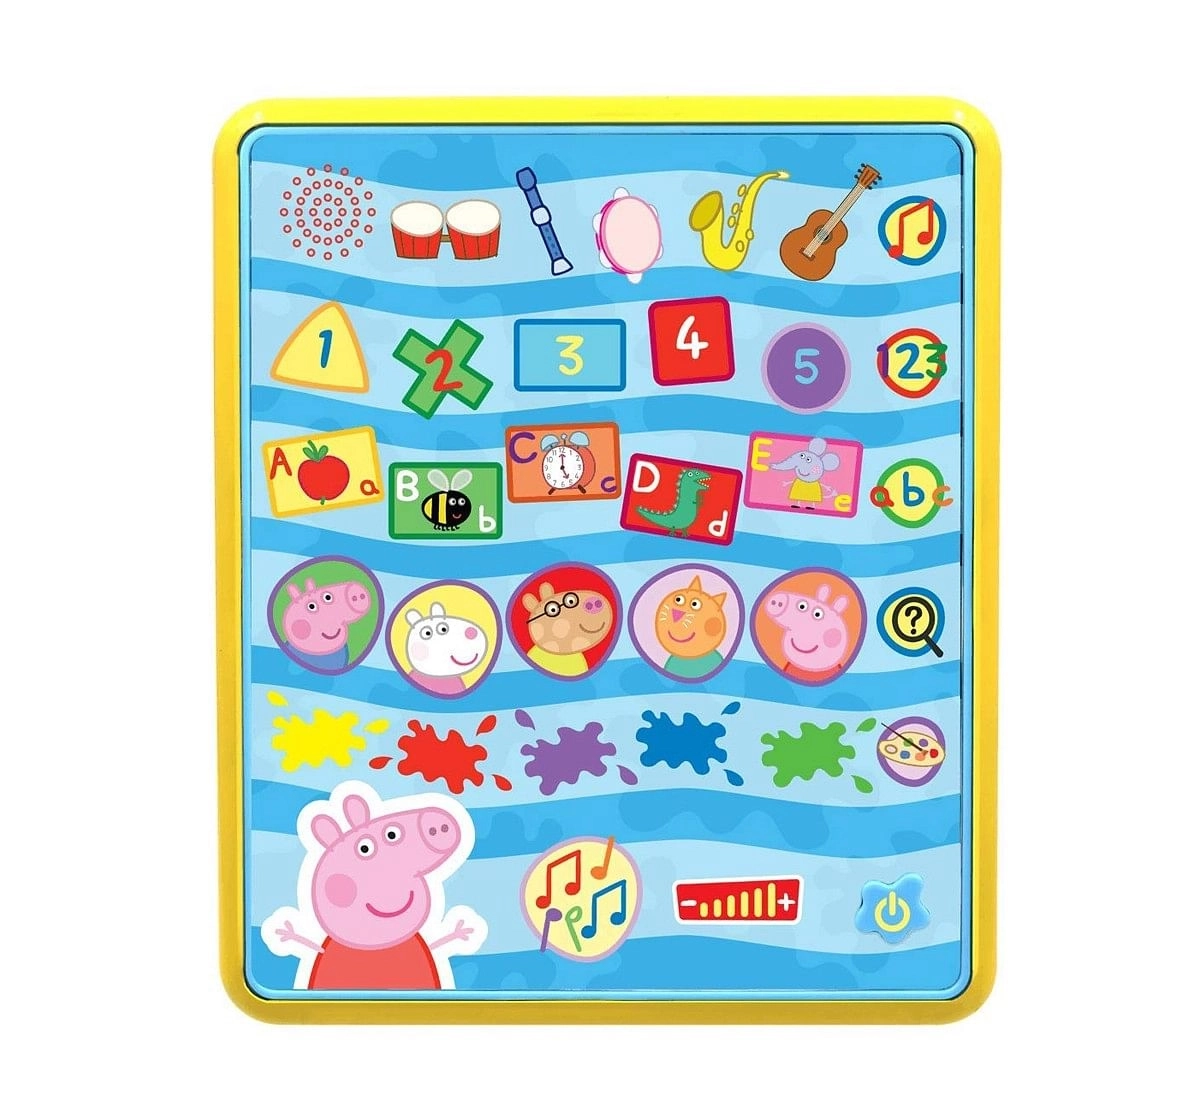  Peppa Pig Smart Tablet Touch Sensitive Screen Learning Toys for Kids age 2Y+ 